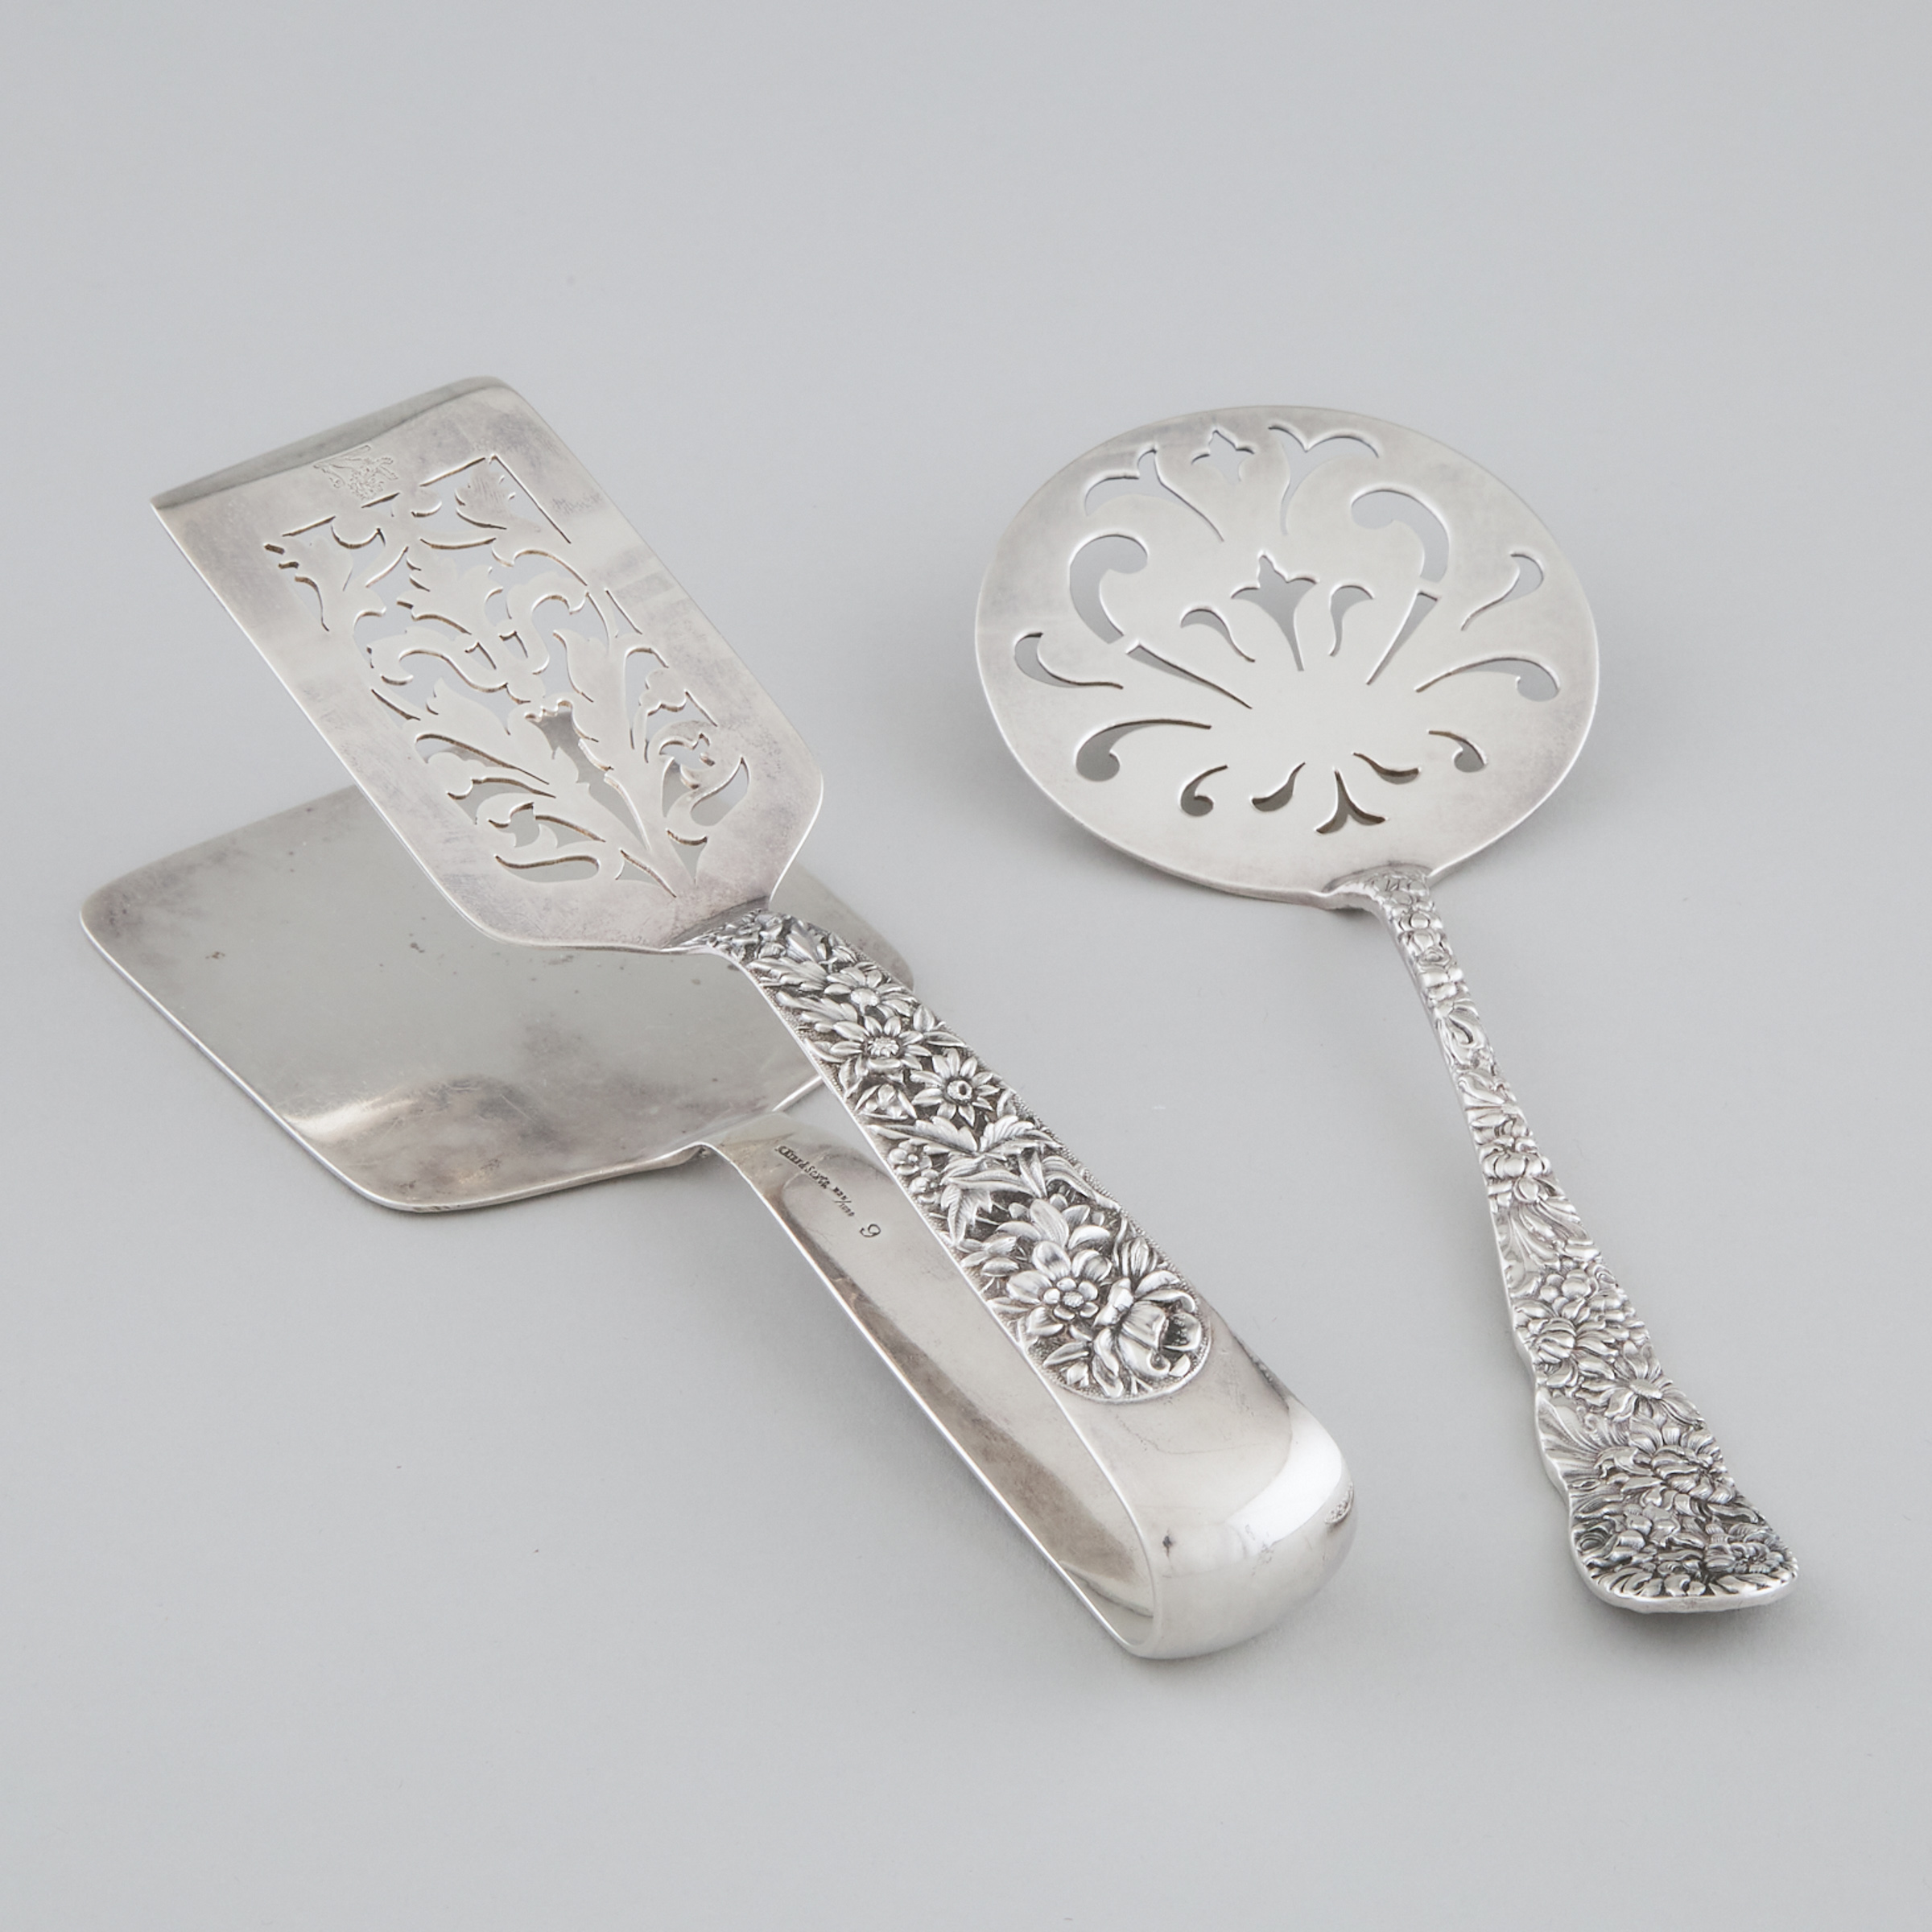 American Silver 'Repoussé' Tomato Server and Serving Tongs, Samuel Kirk & Son and Stieff Co., Baltimore, Md., early 20th century